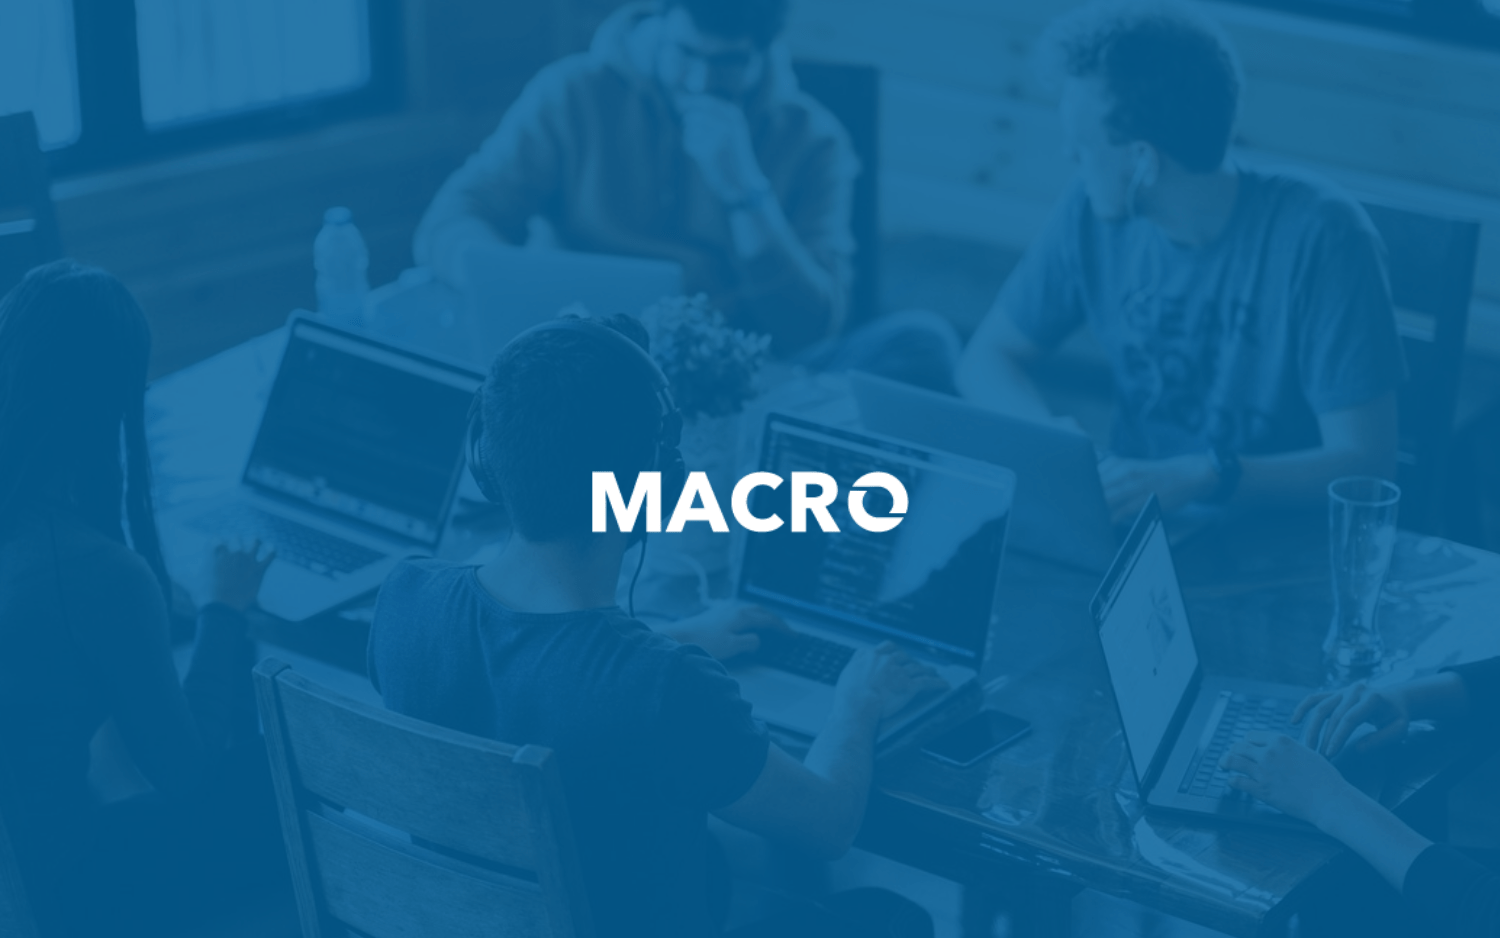 Macro Is Our New Brand